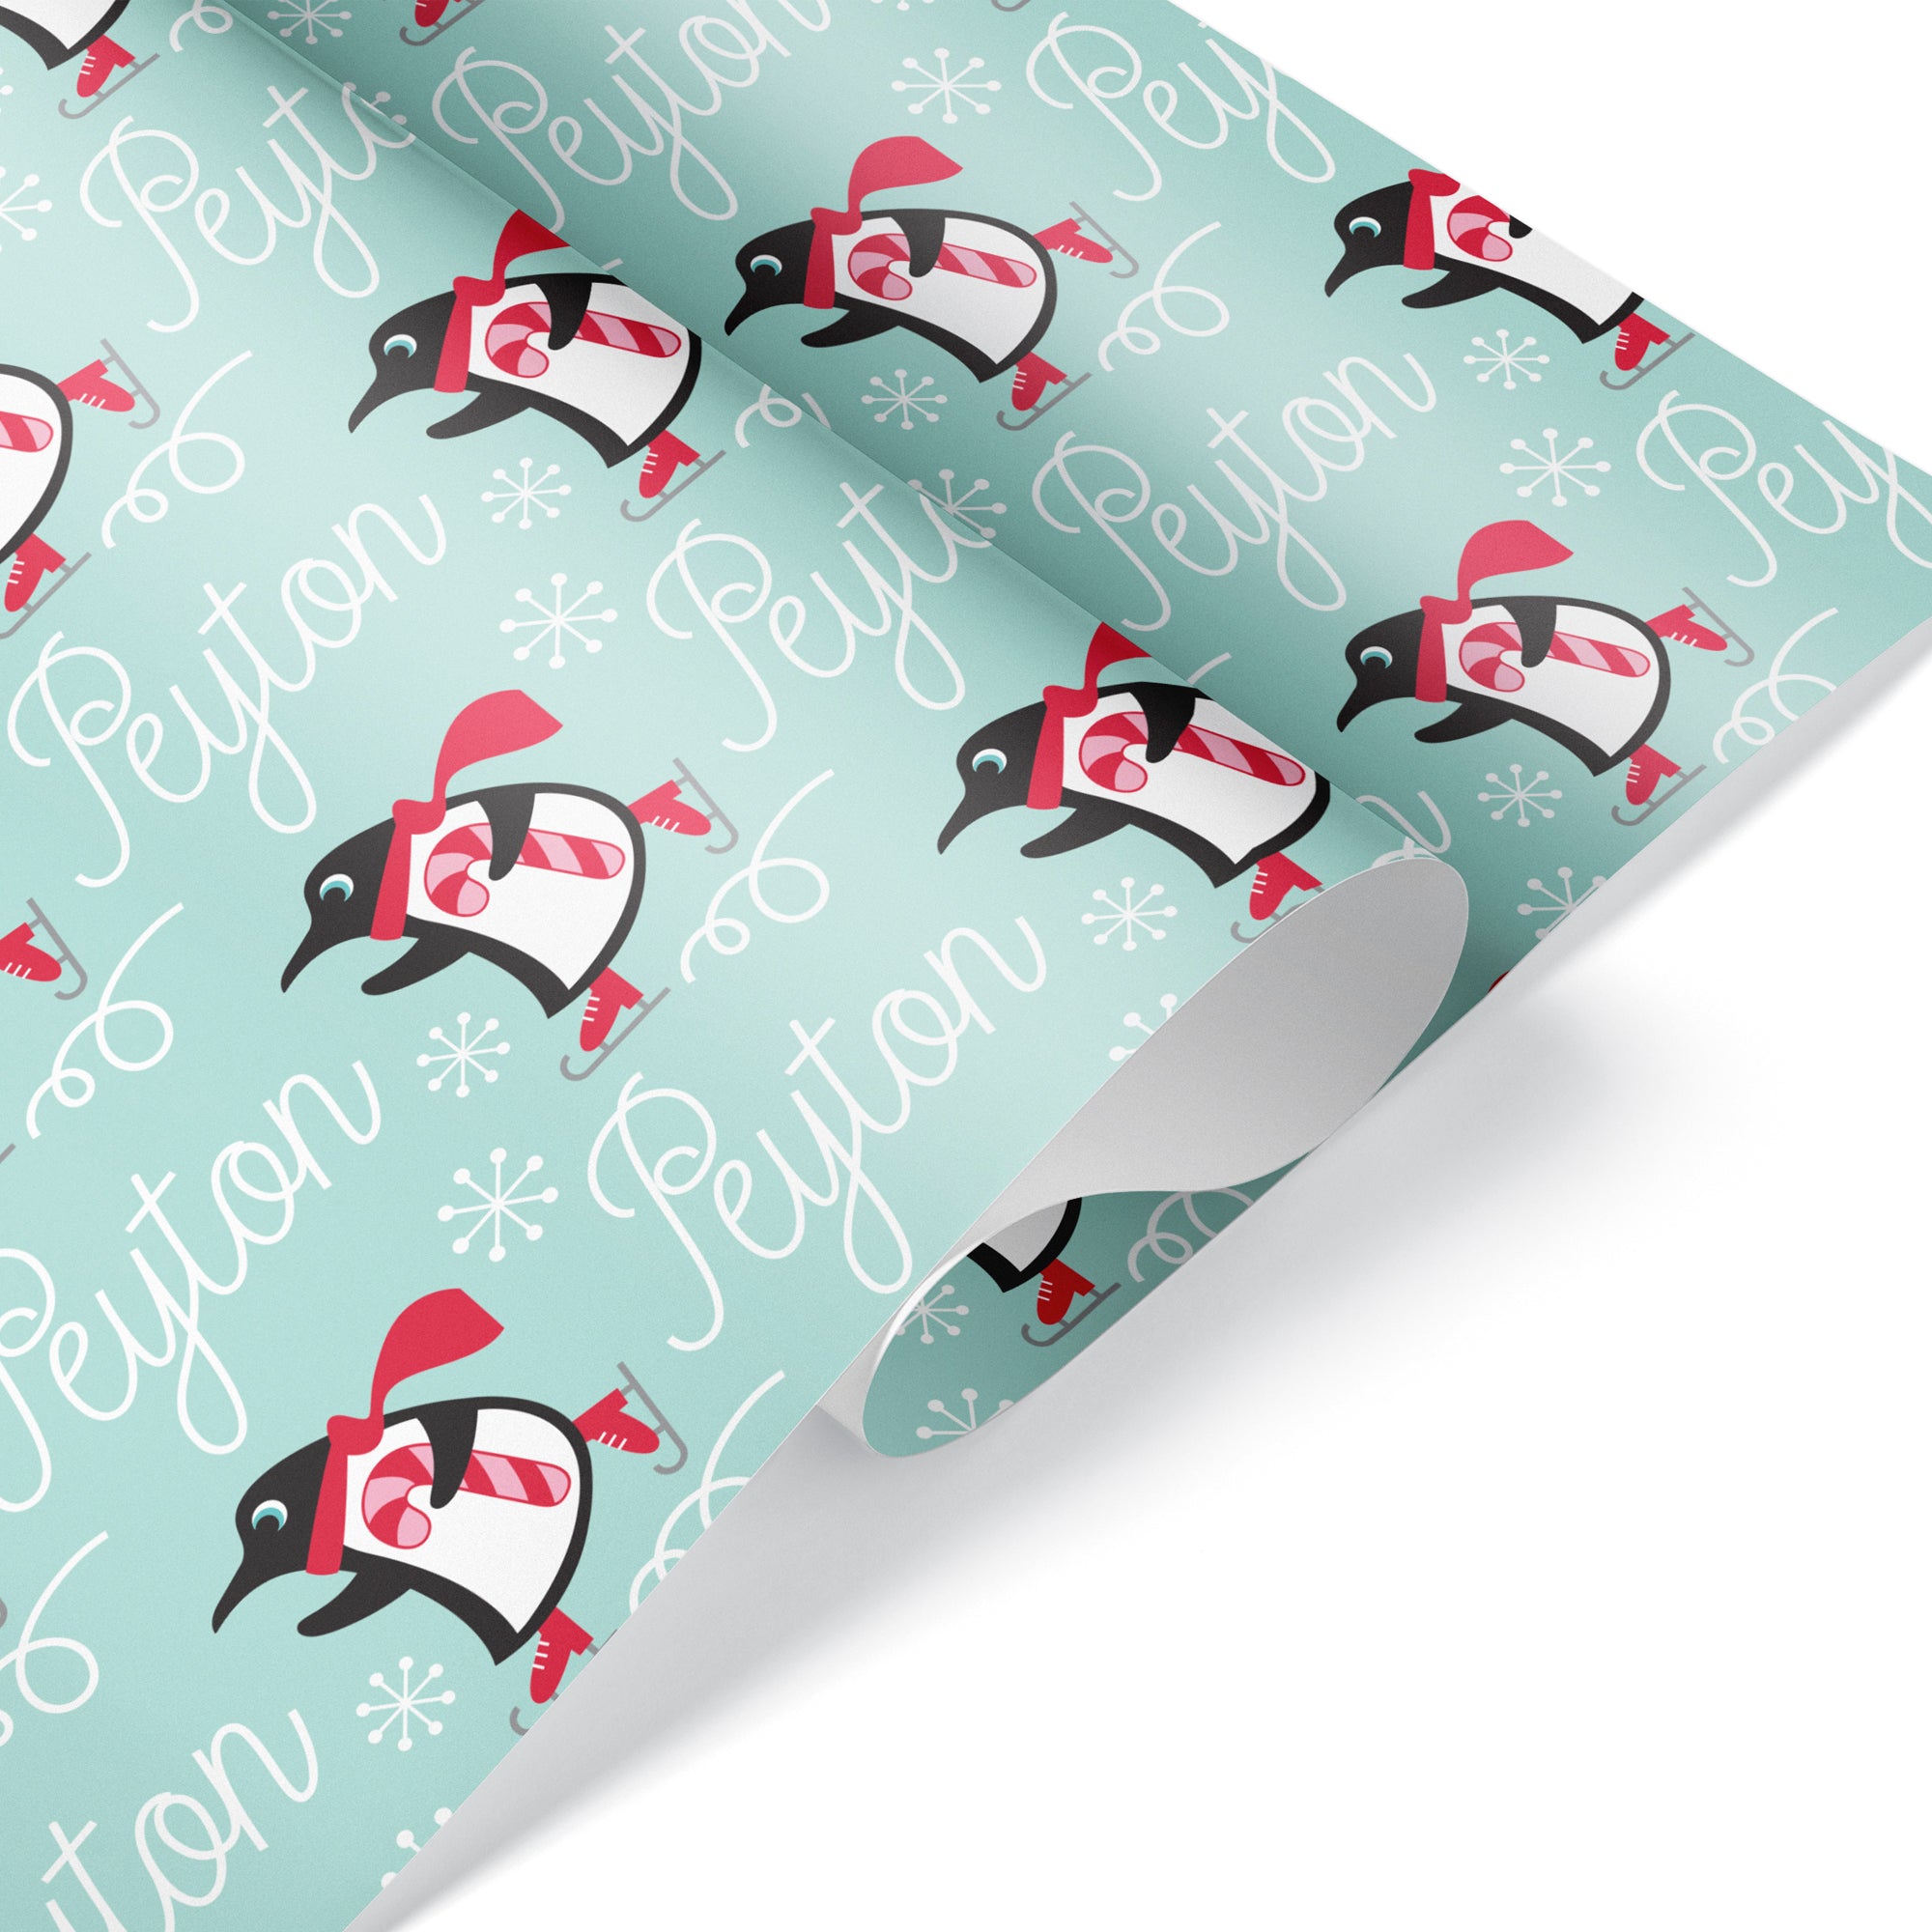 Personalized Vintage Red & White Christmas Wrap Wrapping Paper